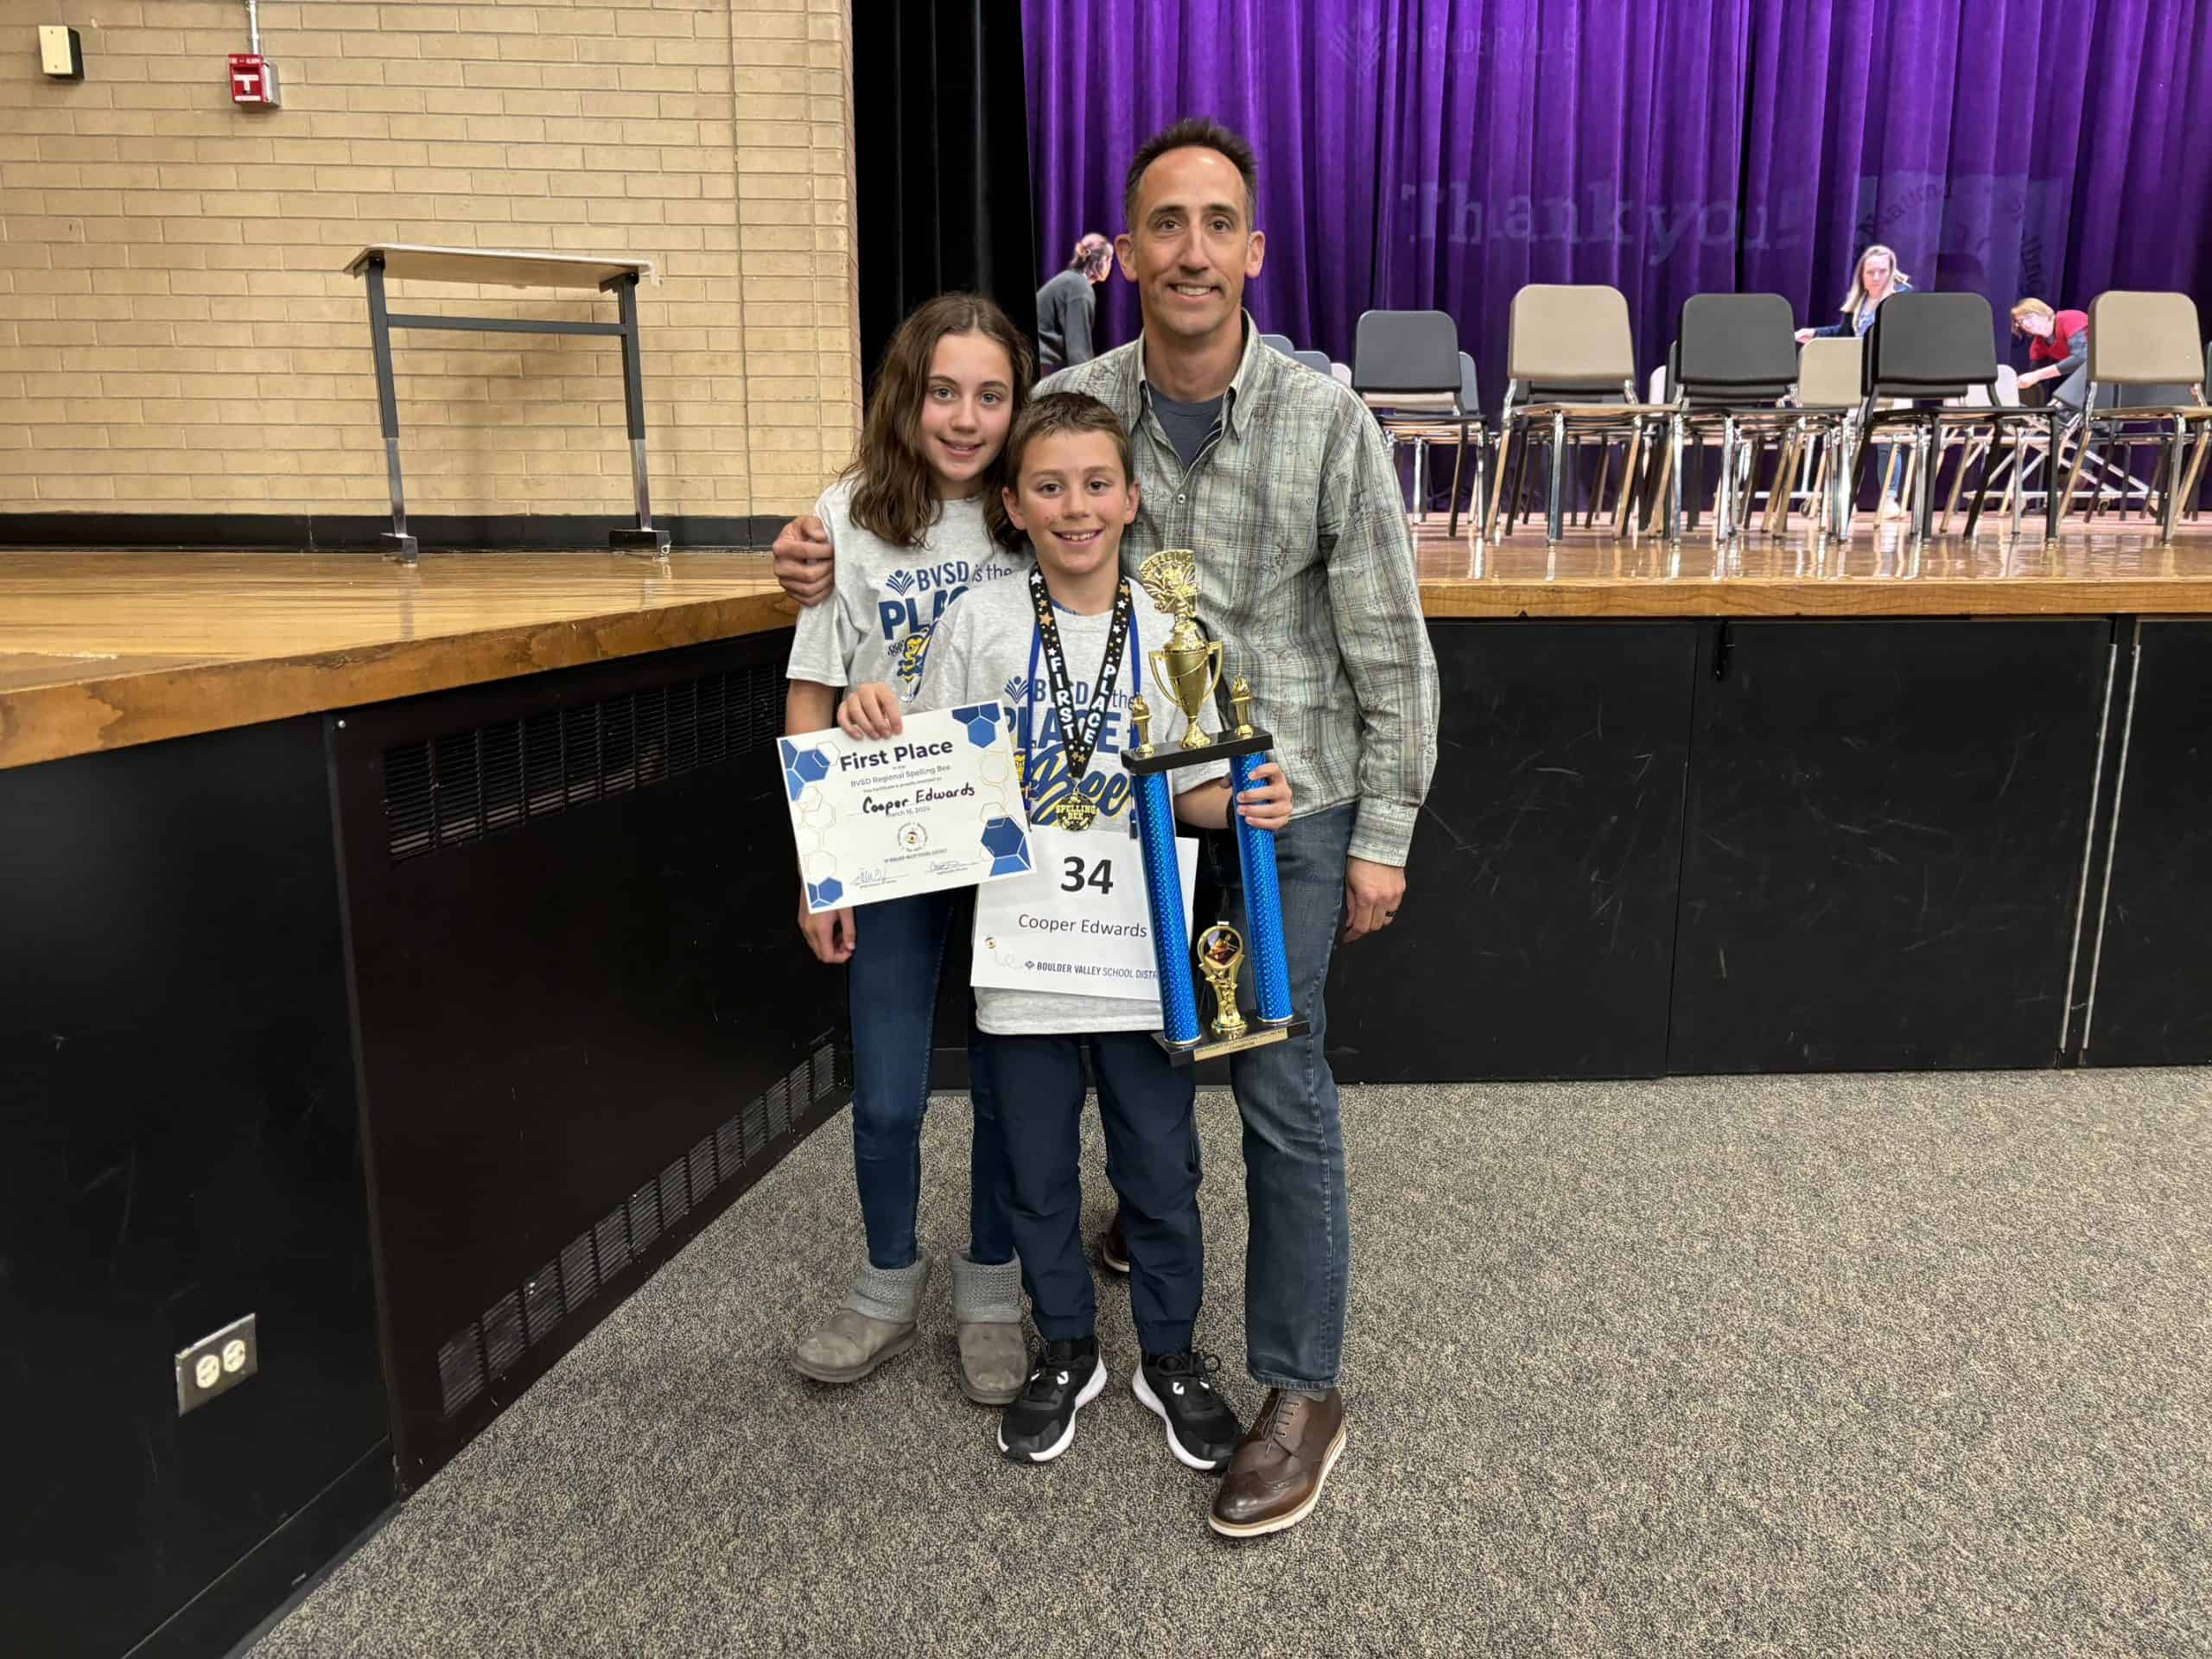 Niwot Elementary Student to Compete at National Spelling Bee